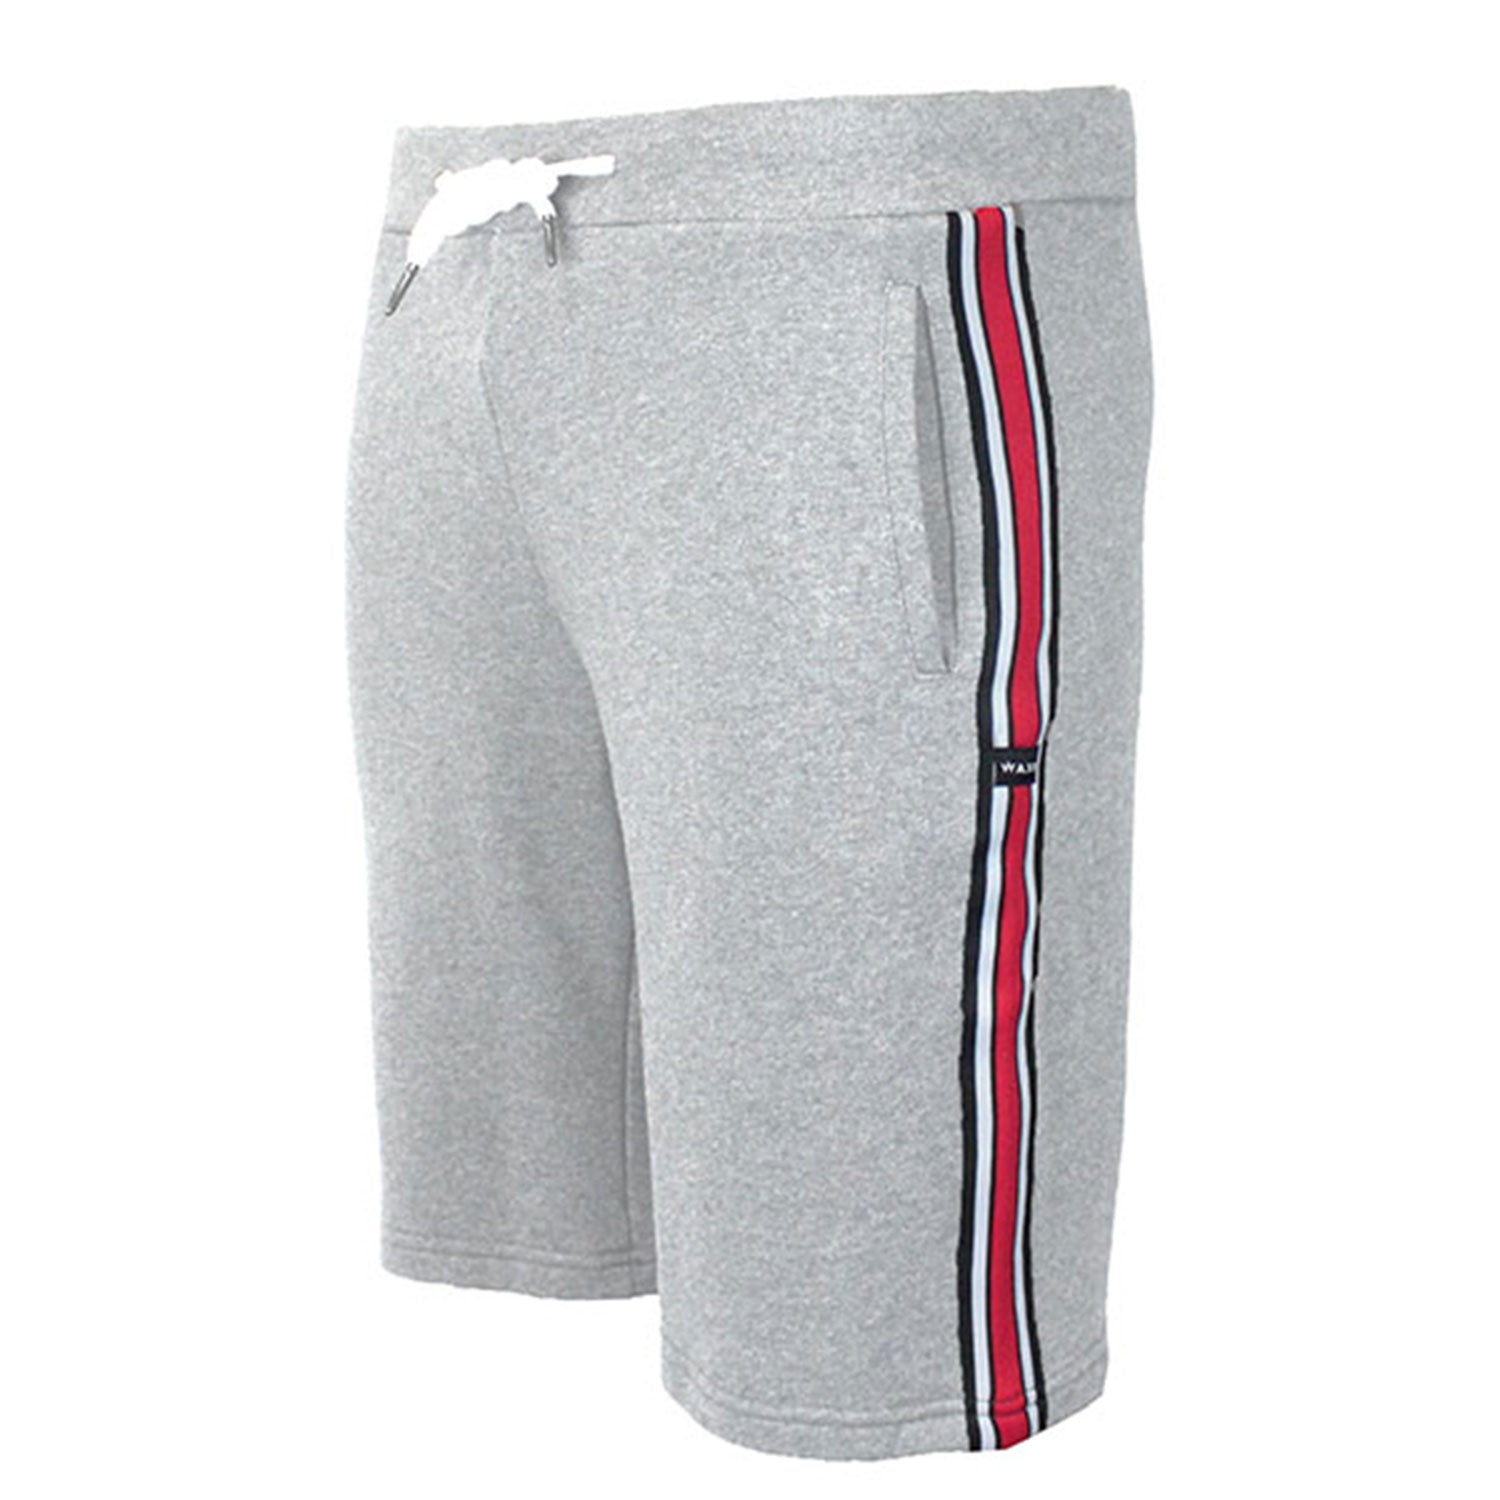 mens jersey shorts with pockets